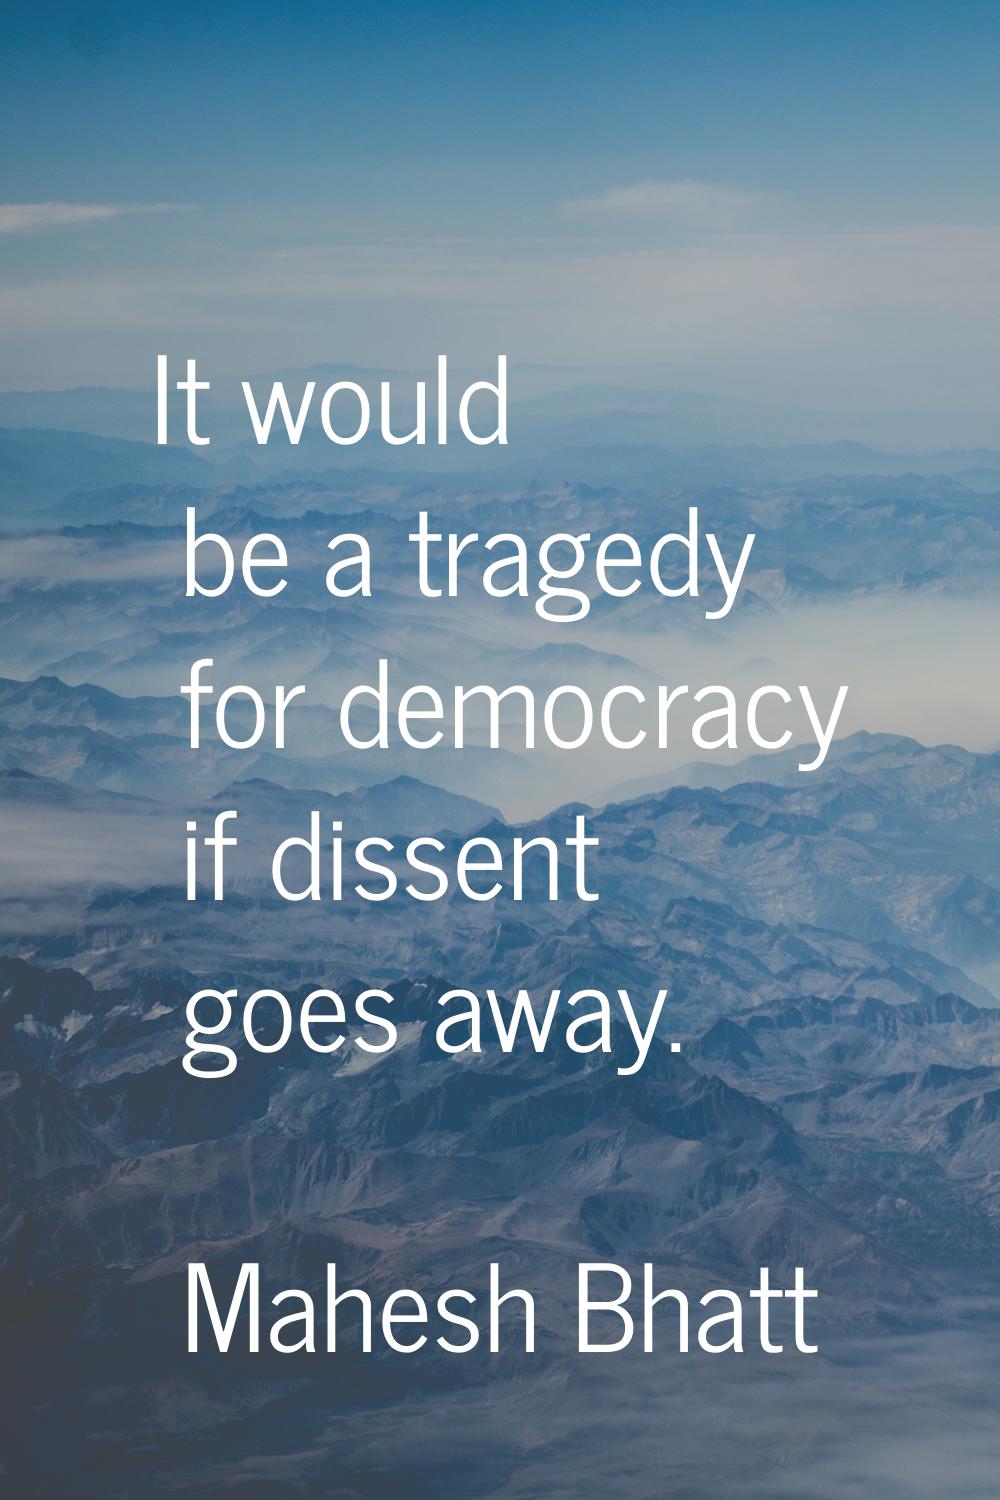 It would be a tragedy for democracy if dissent goes away.